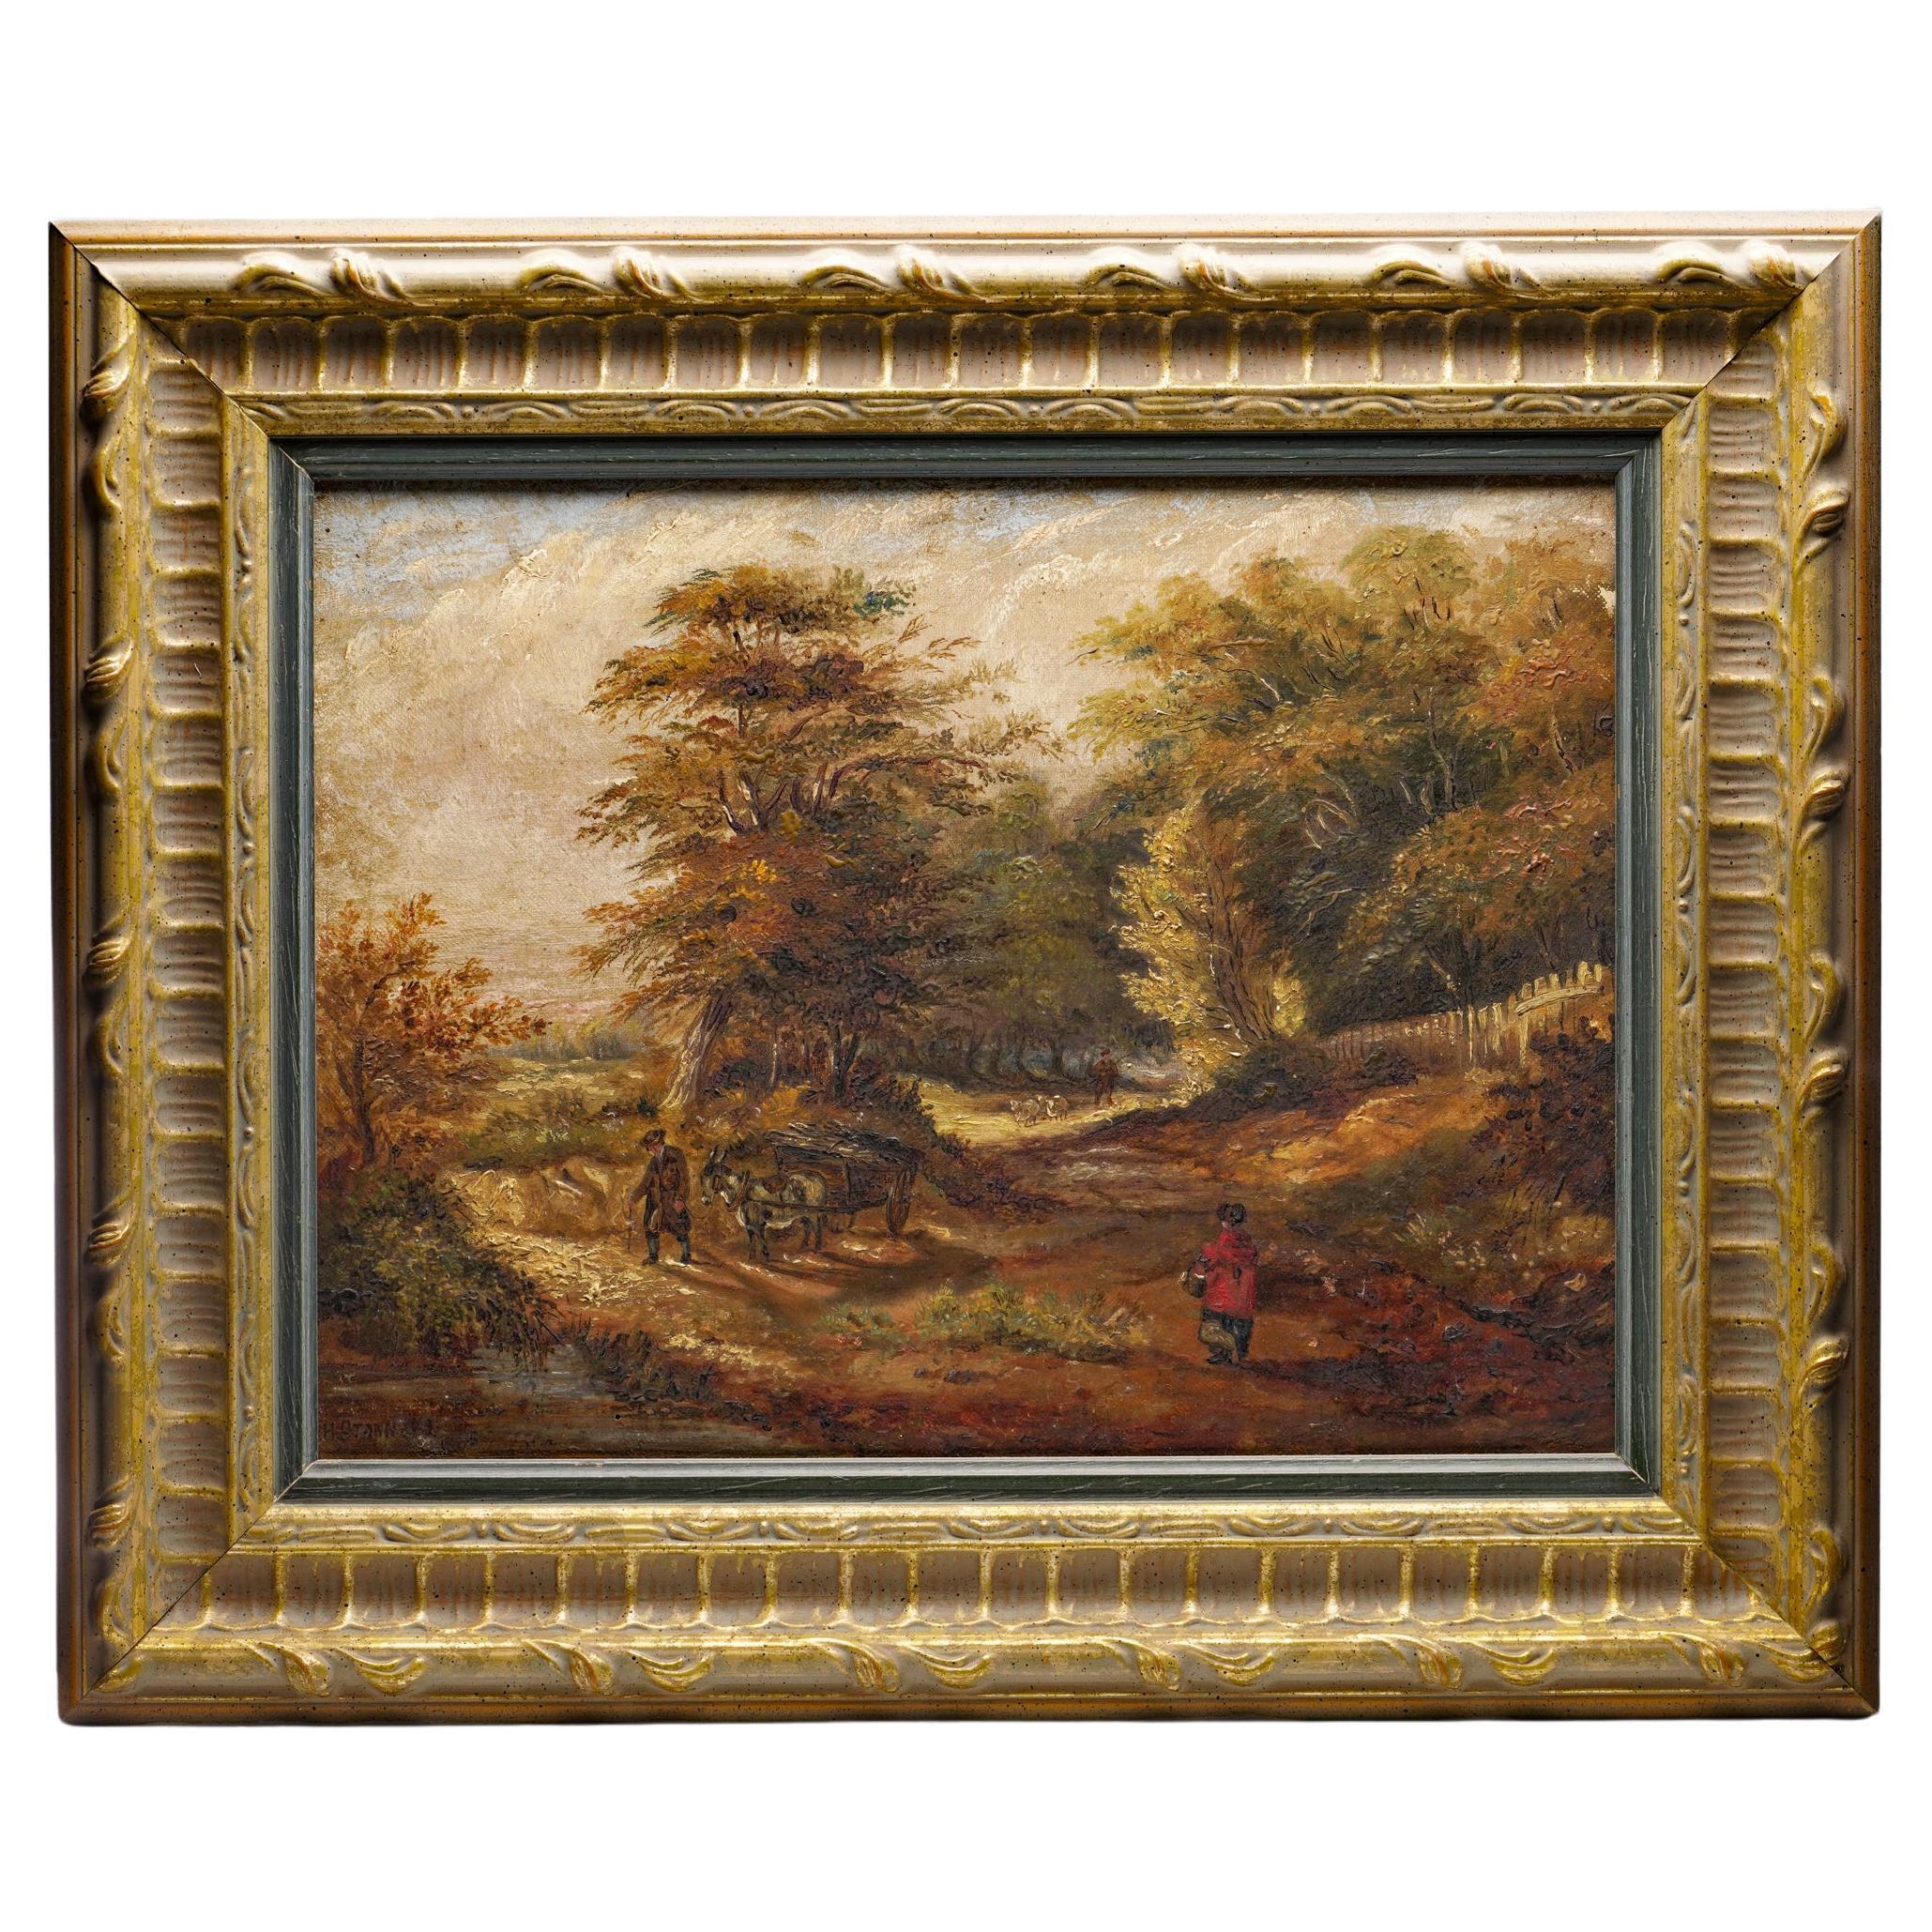 H. Stannava 19th Century Oil Painting of canvas with rural scene